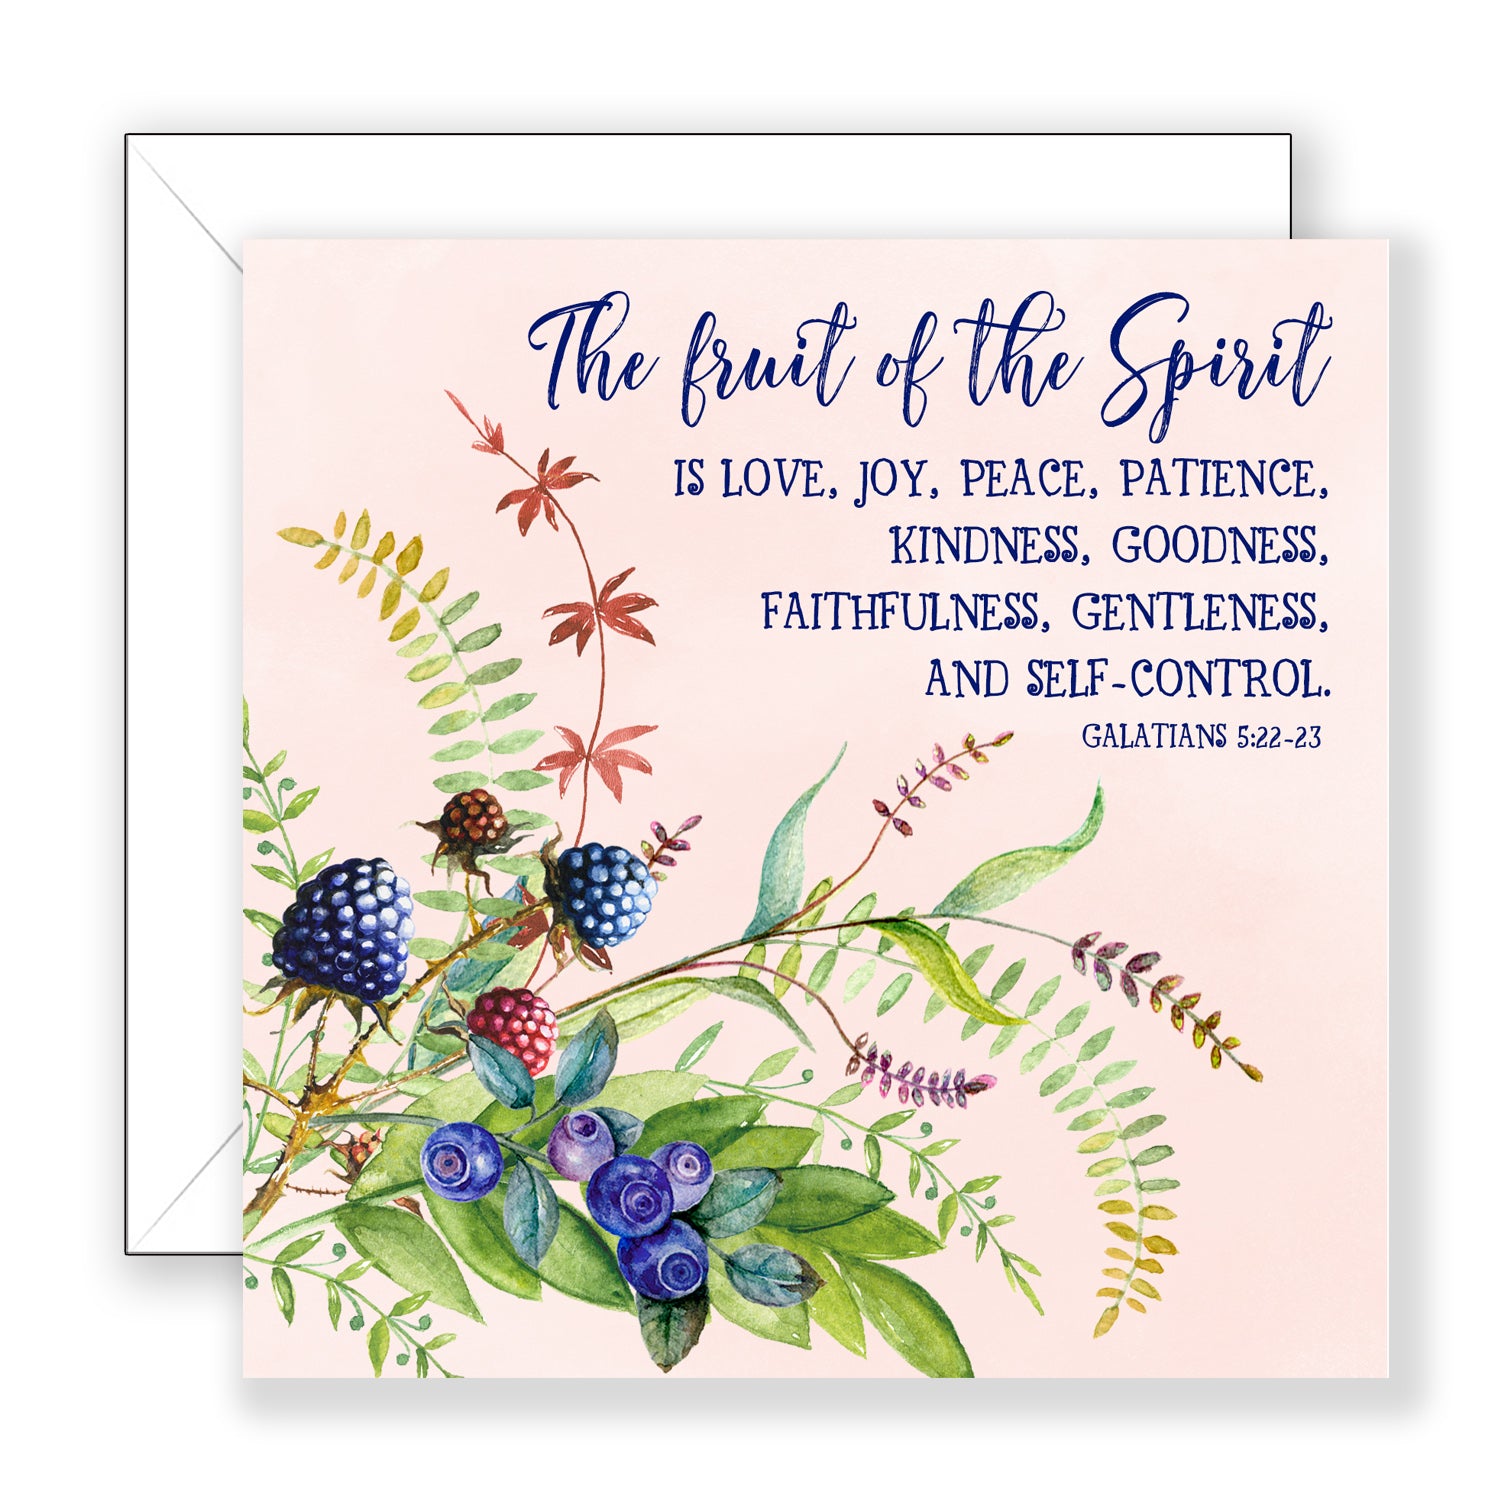 The Fruit of the Spirit (Galations 5:22-23) - Encouragement Card